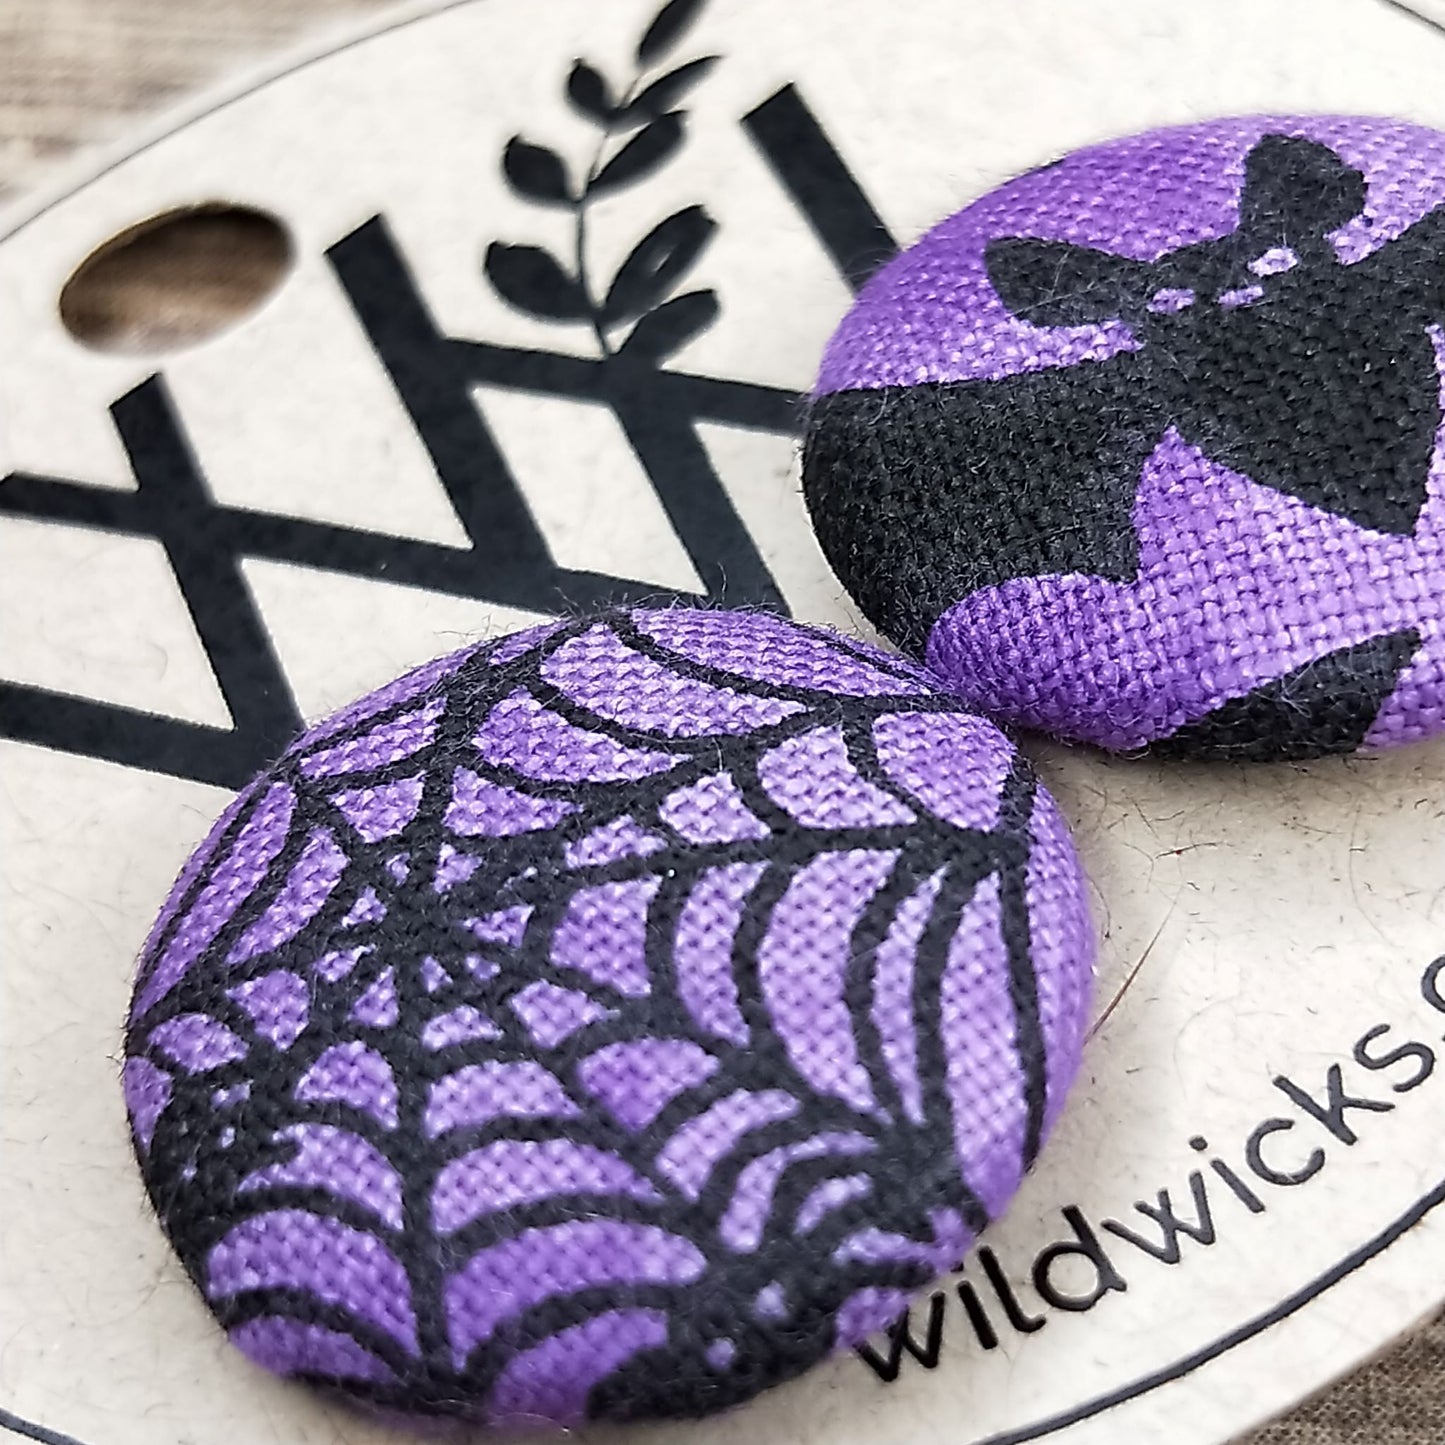 Wildears Fabric Covered Button Earrings Halloween Purple Bats and Spiders 19mm